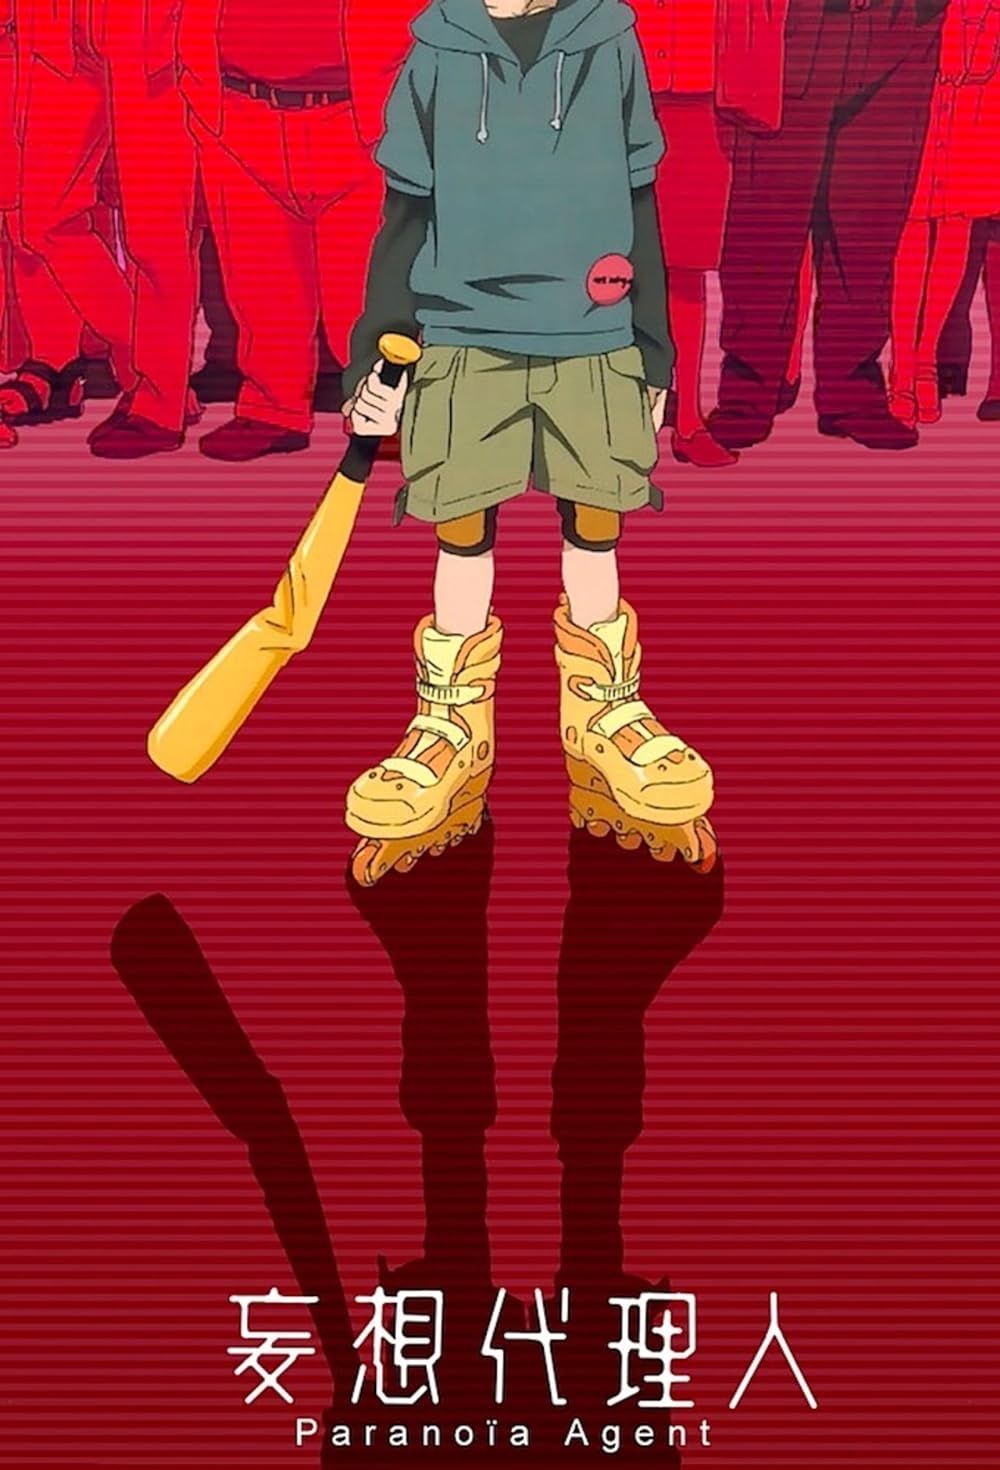 A boy wearing inline skates holds a baseball bat on the poster of Paranoia Agent